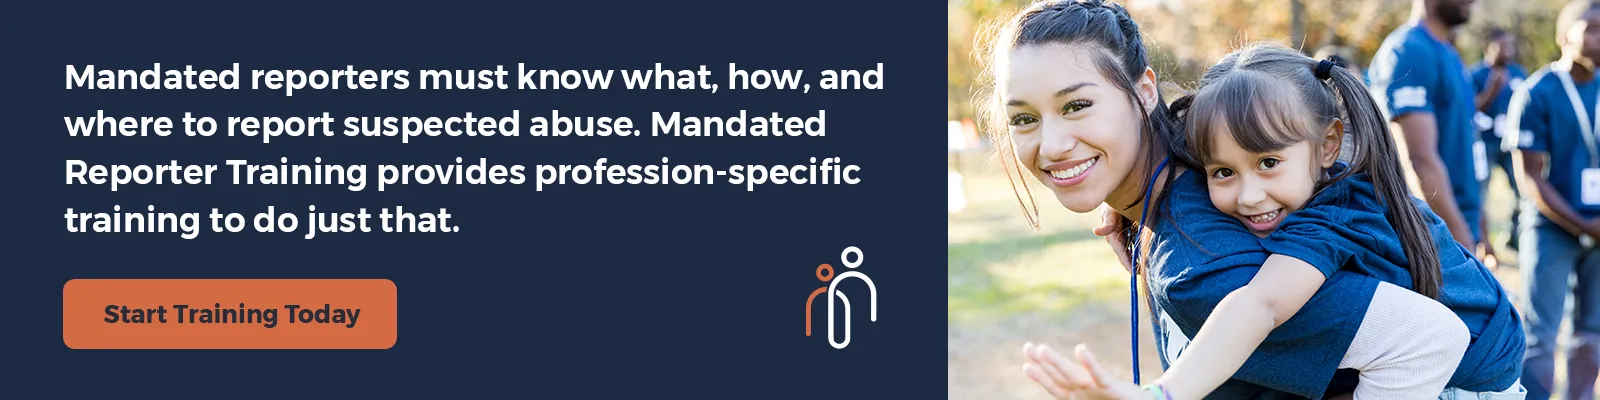 Mandated reporters must know what, how, and where to report suspected abuse. Mandated Reporter Training provides profession-specific training to do just that. Start training today.